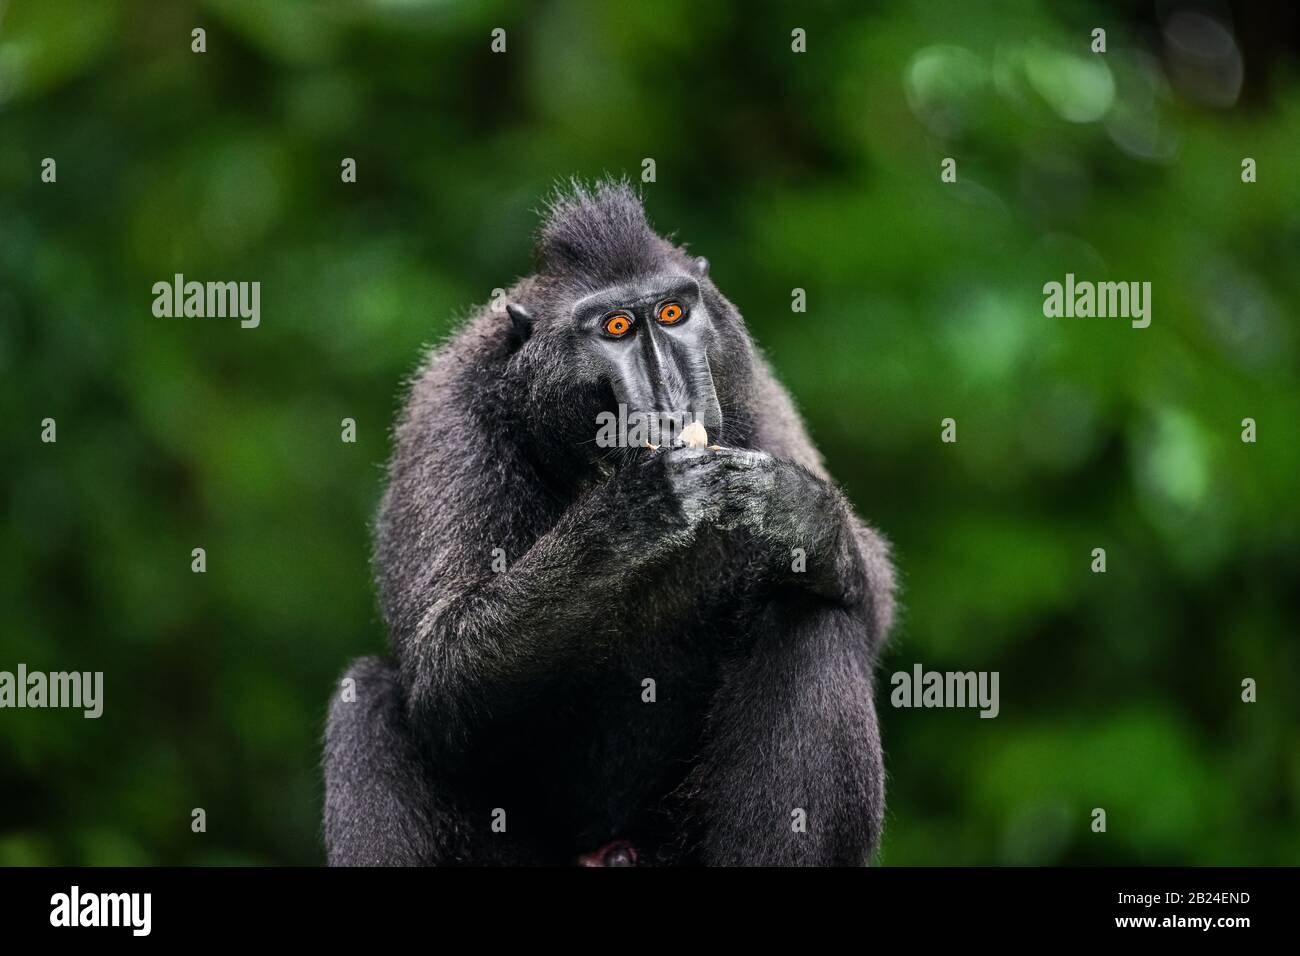 The Celebes crested macaque with fruit. Green natural background. Crested black macaque, Sulawesi crested macaque, sulawesi macaque or the black ape. Stock Photo